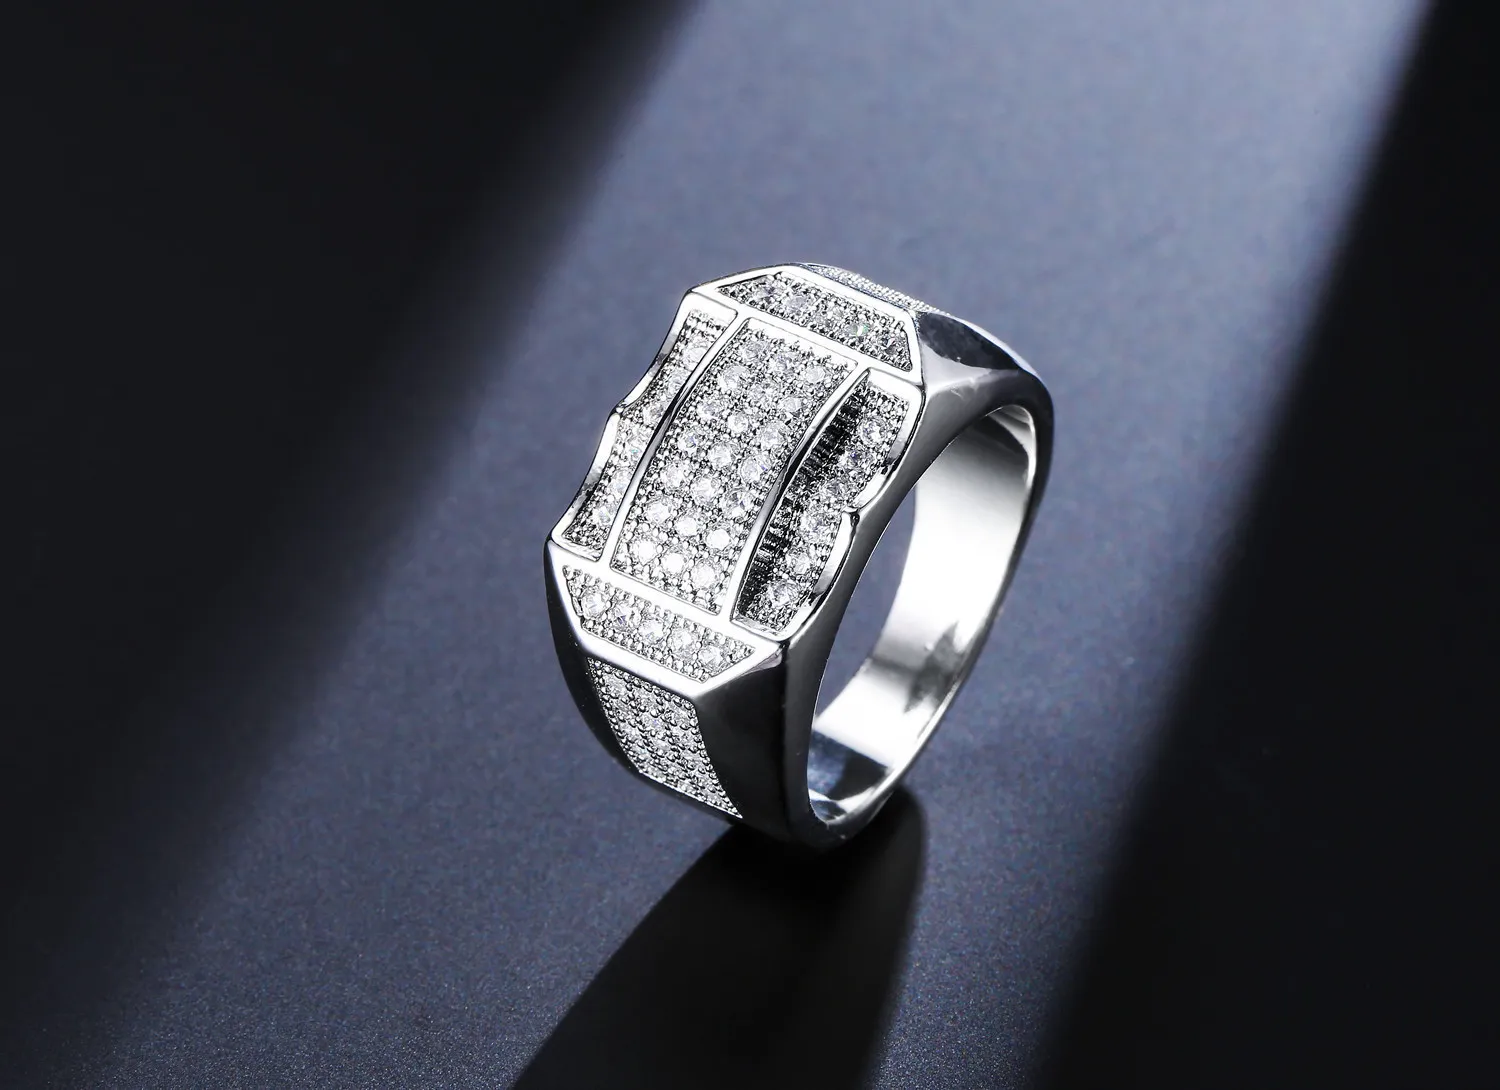 Omhxzj band entier anneaux européens Fashion Man Party Mariage Gift Luxury Square White Zircon 18kt Blancs Gold Rose Gold Ring RR48781642